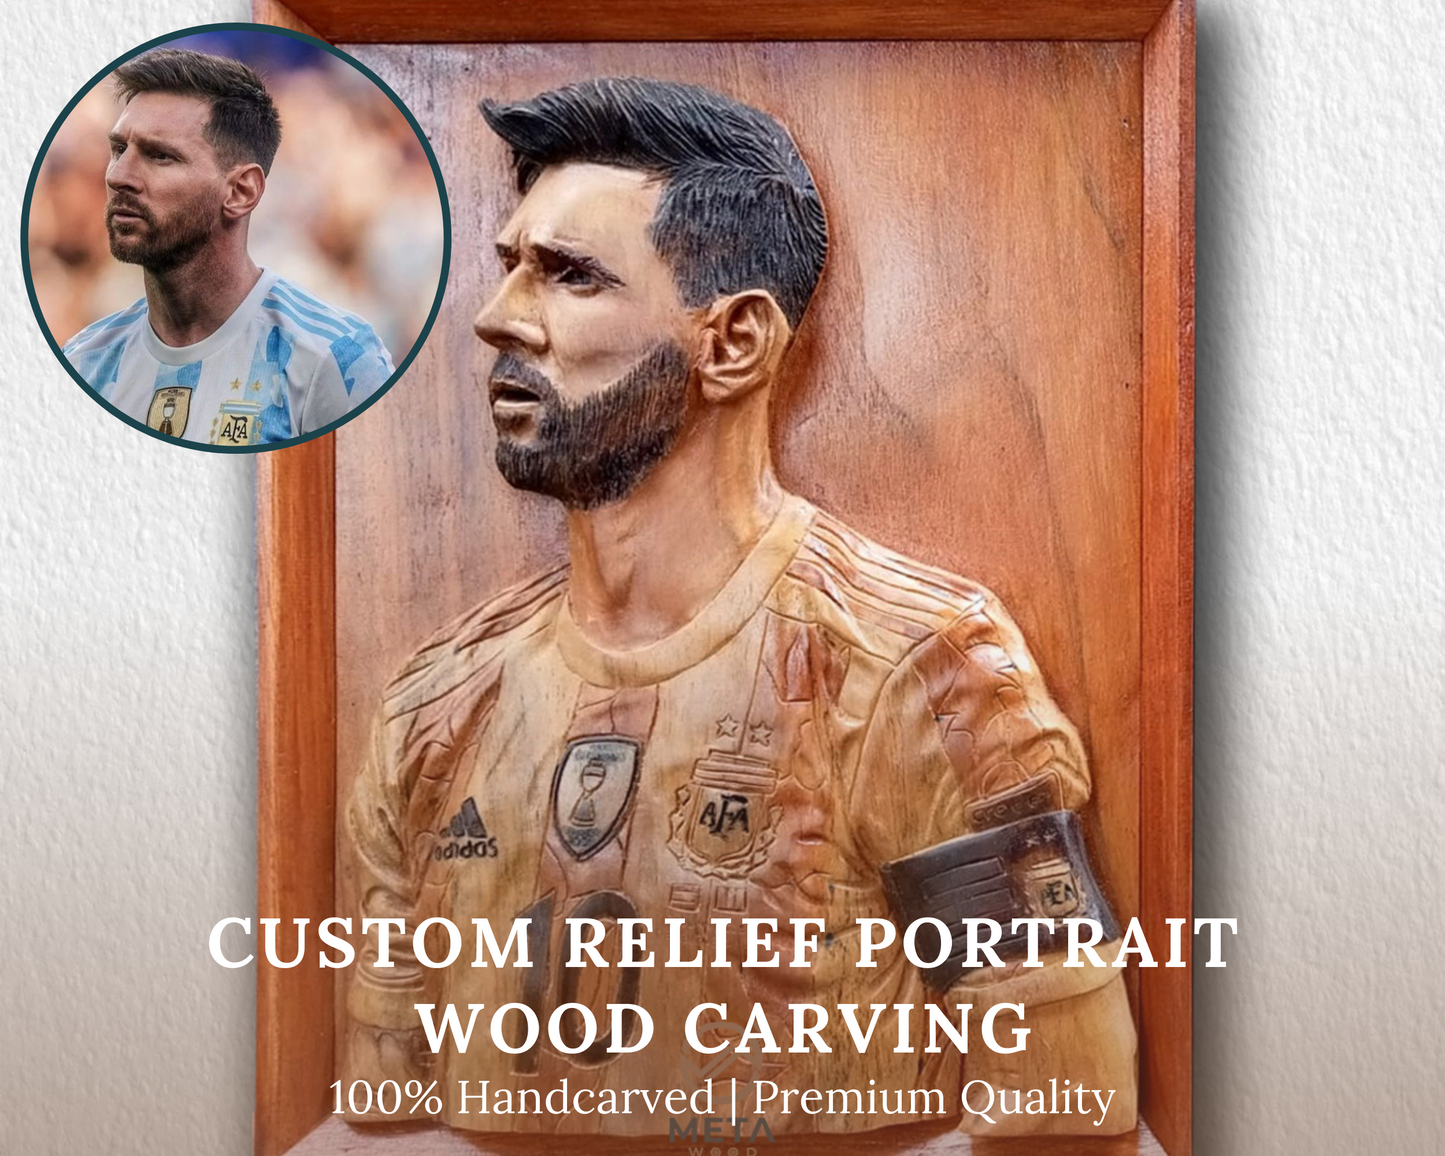 Custom 3D Portrait Wood Carving, Hand carved Photo Wood Relief Art, Personalised Realistic Human Face Wood Sculpture, Lionel Messi Portrait Wood Art